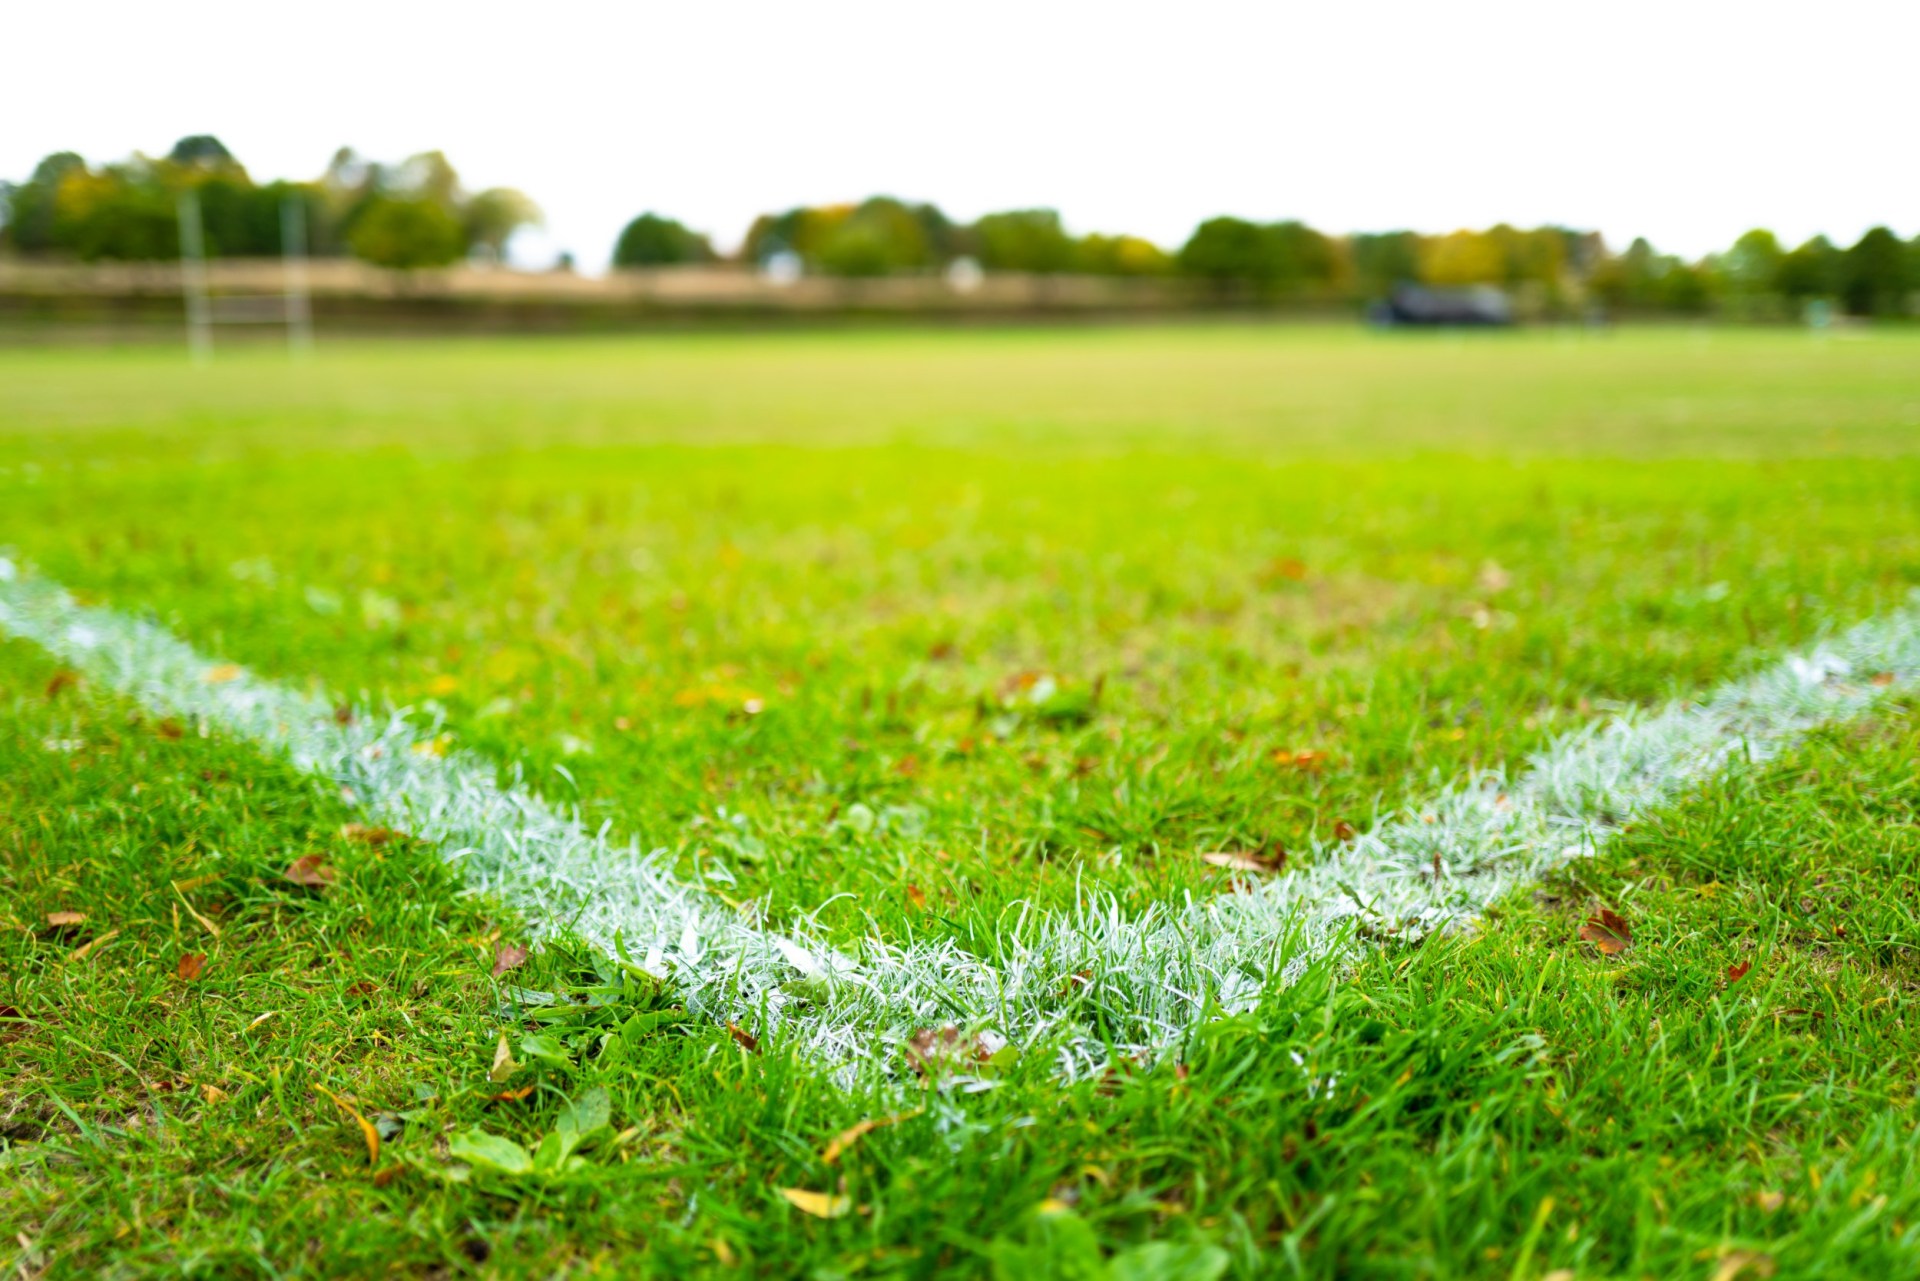 head teacher says school can't hire new staff because the grass needs cutting weekly